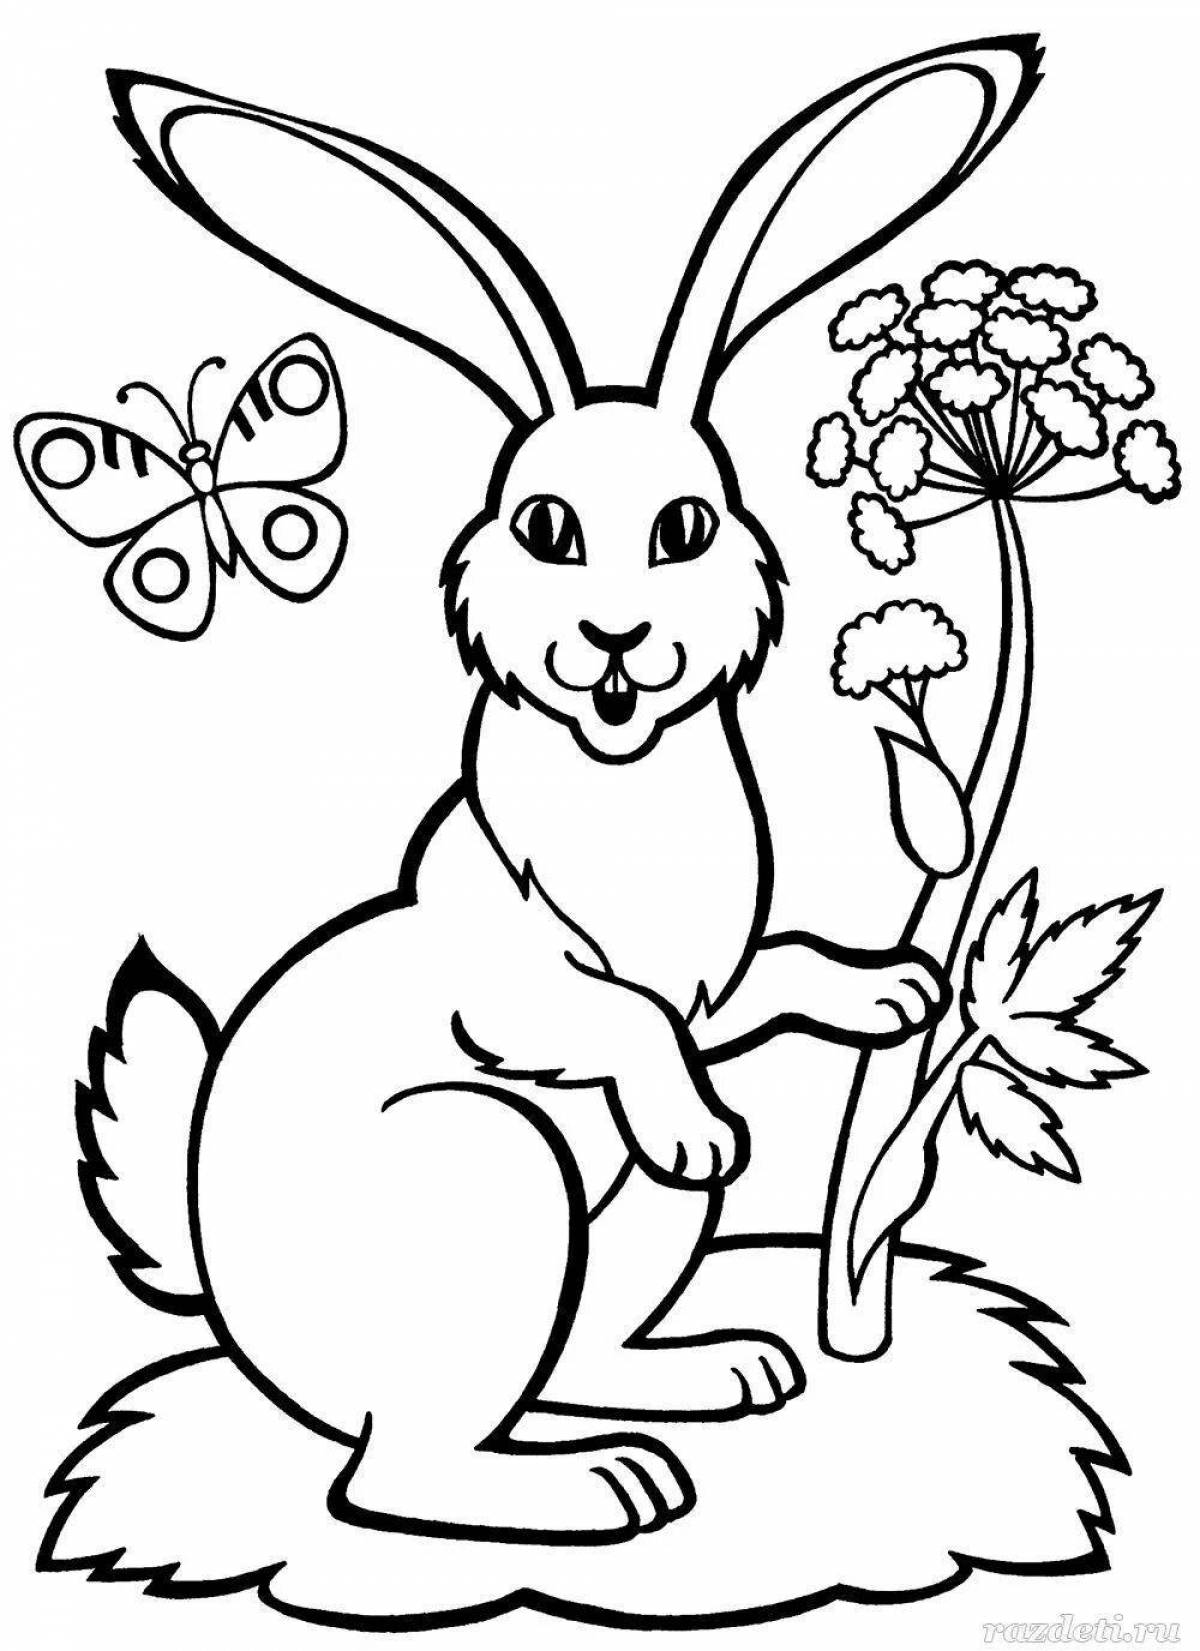 Glitter forest animal coloring page for 4-5 year olds